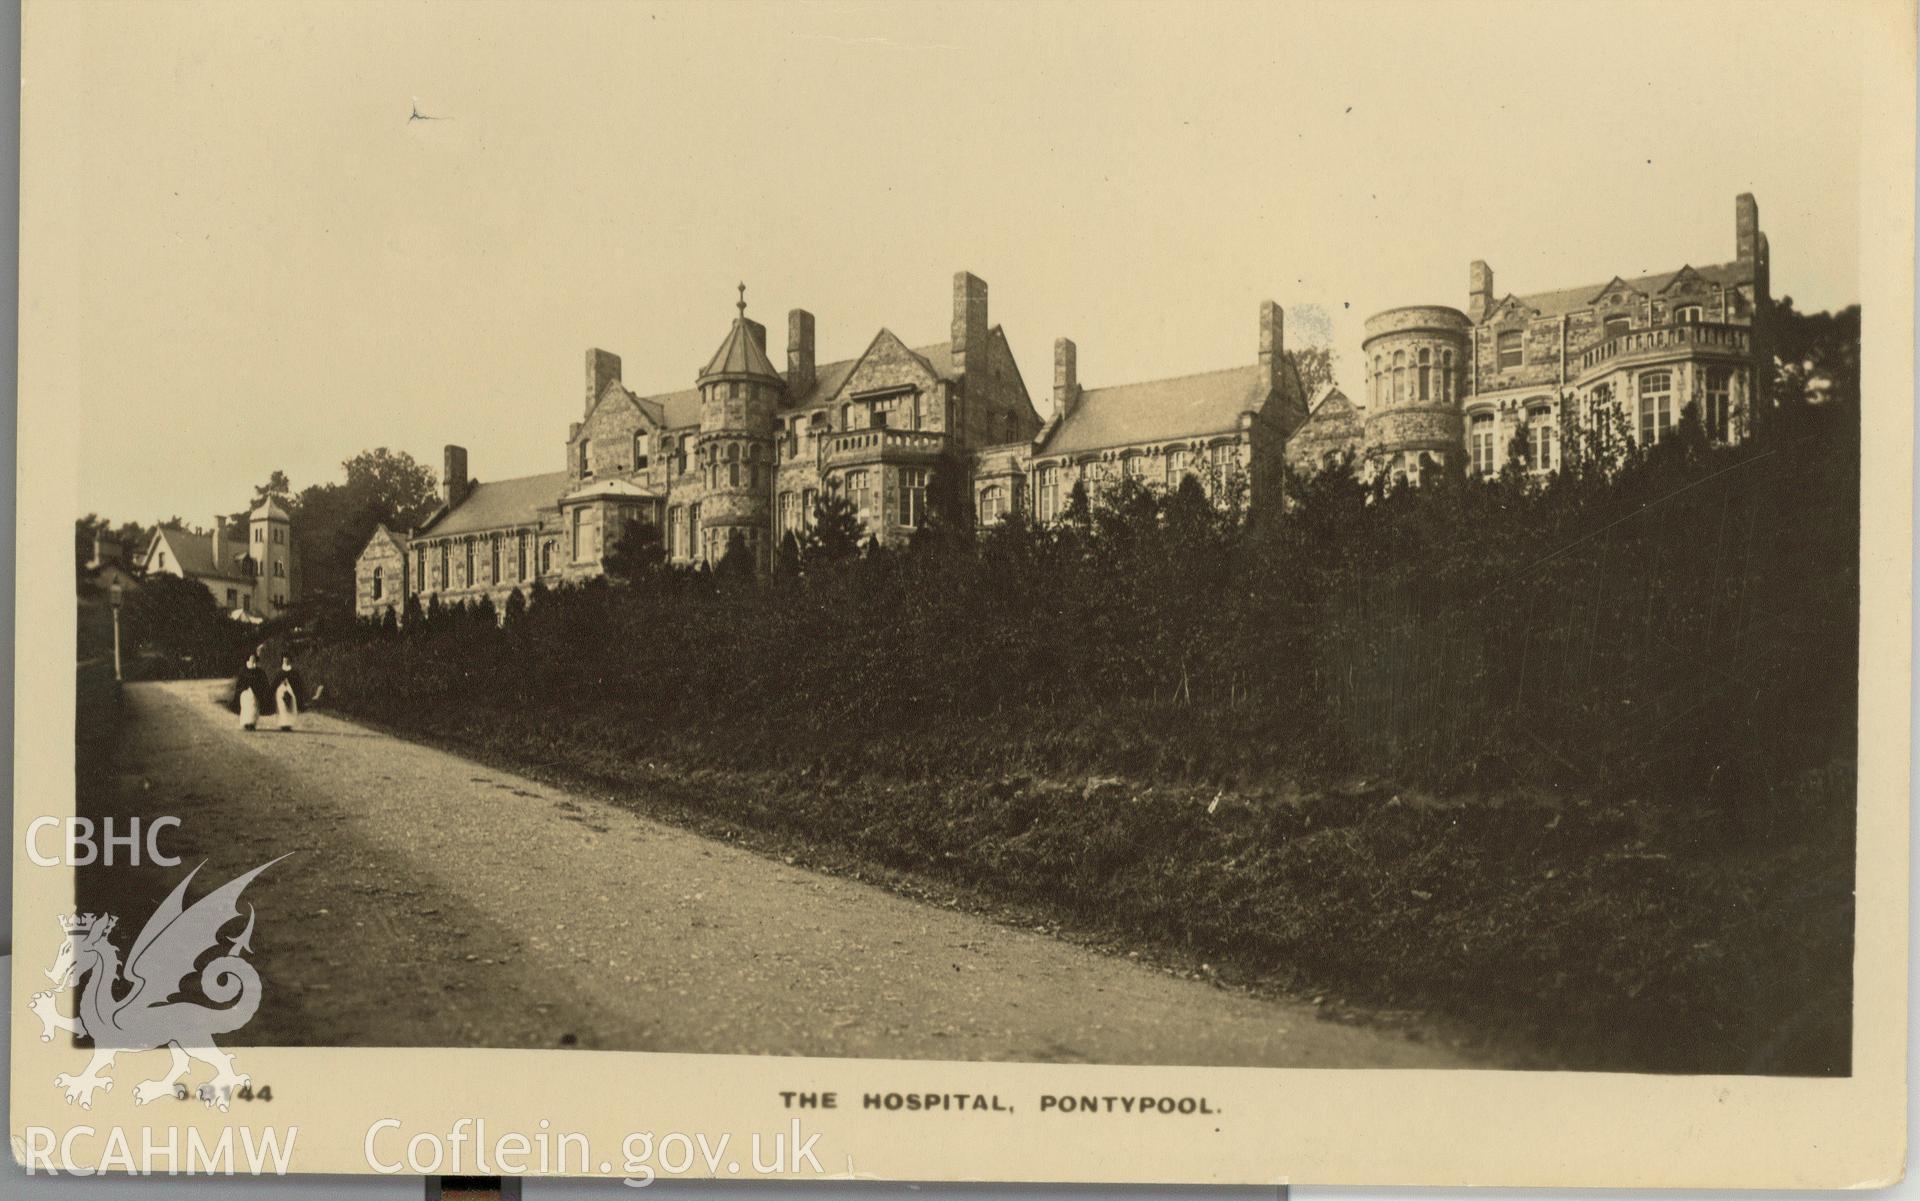 Digitised postcard image of Pontypool and District Hospital, Kingsway Real Photo serie. Produced by Parks and Gardens Data Services, from an original item in the Peter Davis Collection at Parks and Gardens UK. We hold only web-resolution images of this collection, suitable for viewing on screen and for research purposes only. We do not hold the original images, or publication quality scans.